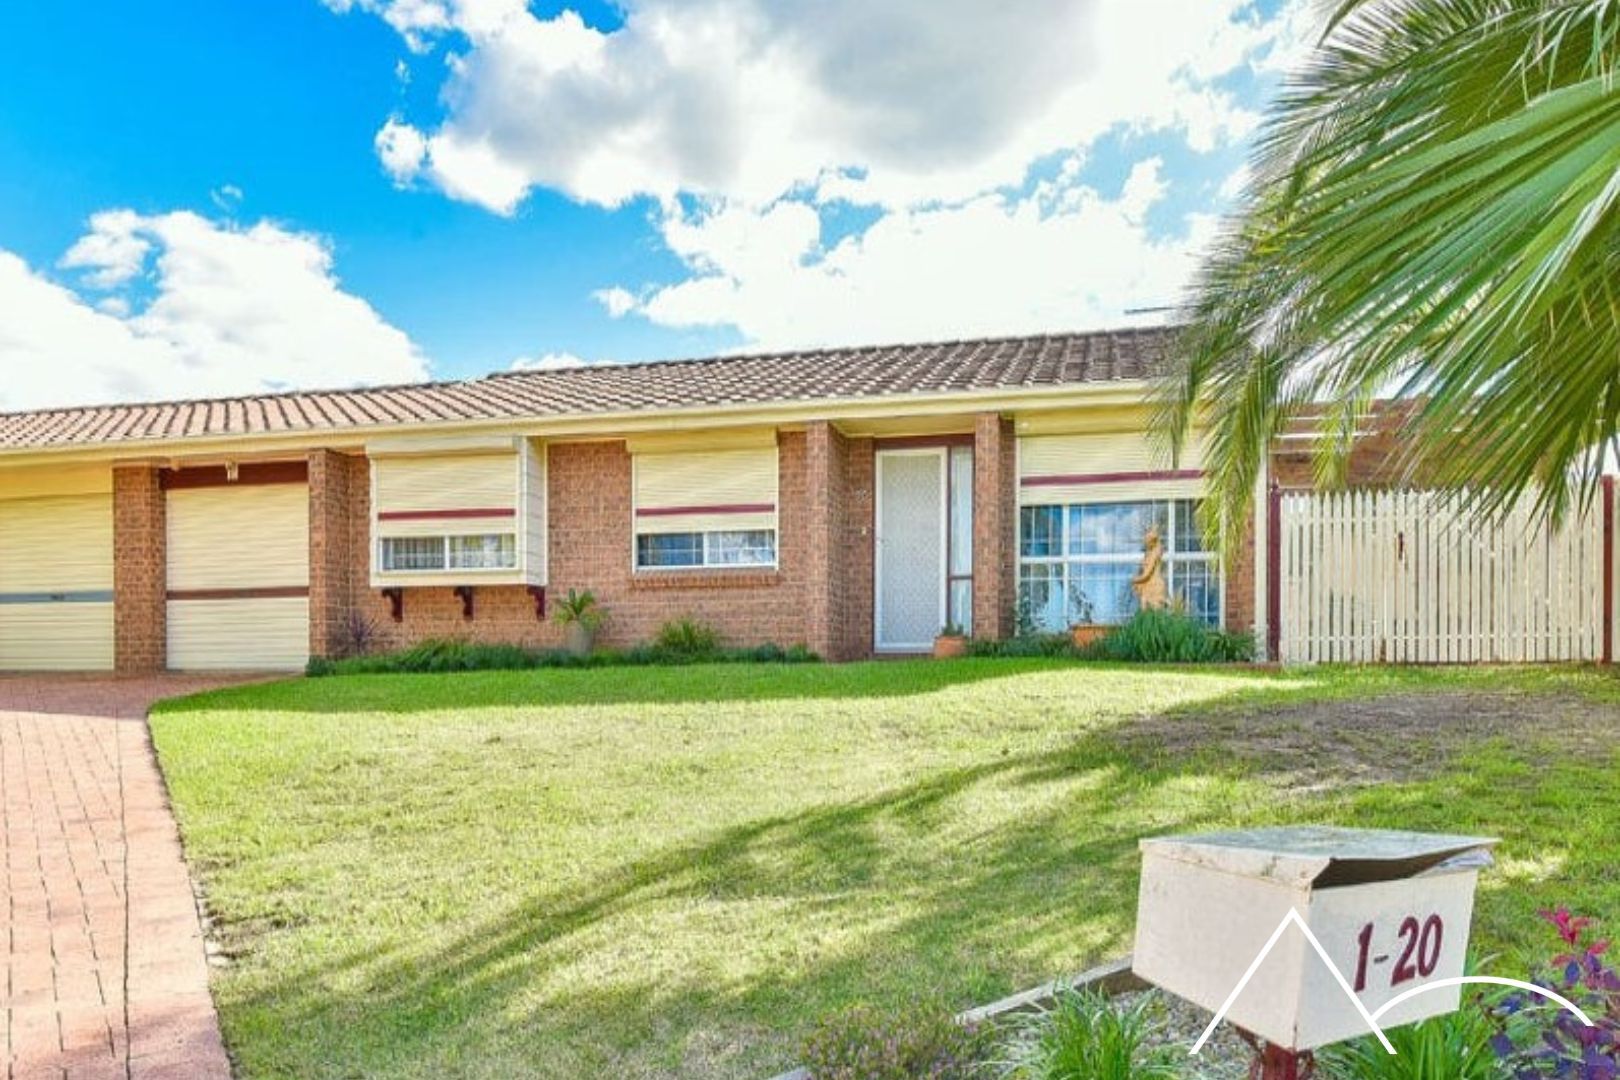 3 bedrooms Semi-Detached in 1/20 Scobie Place MOUNT ANNAN NSW, 2567